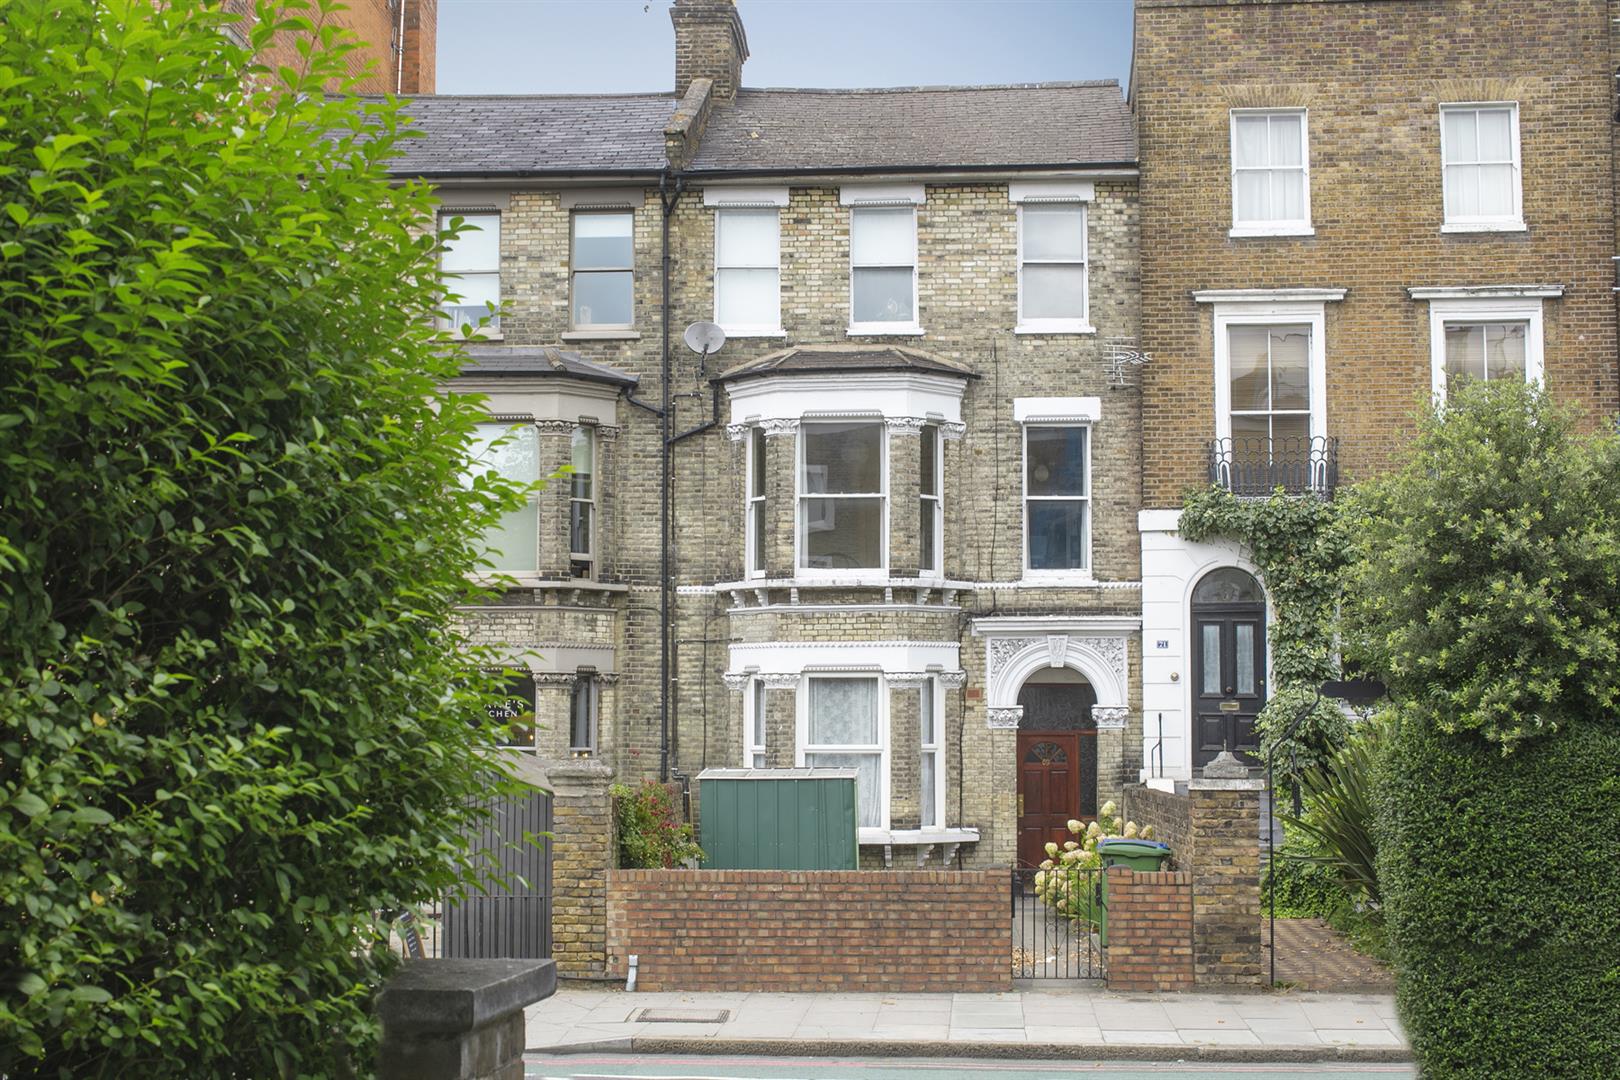 Flat - Conversion Sold in Peckham Road, Camberwell, SE5 859 view1